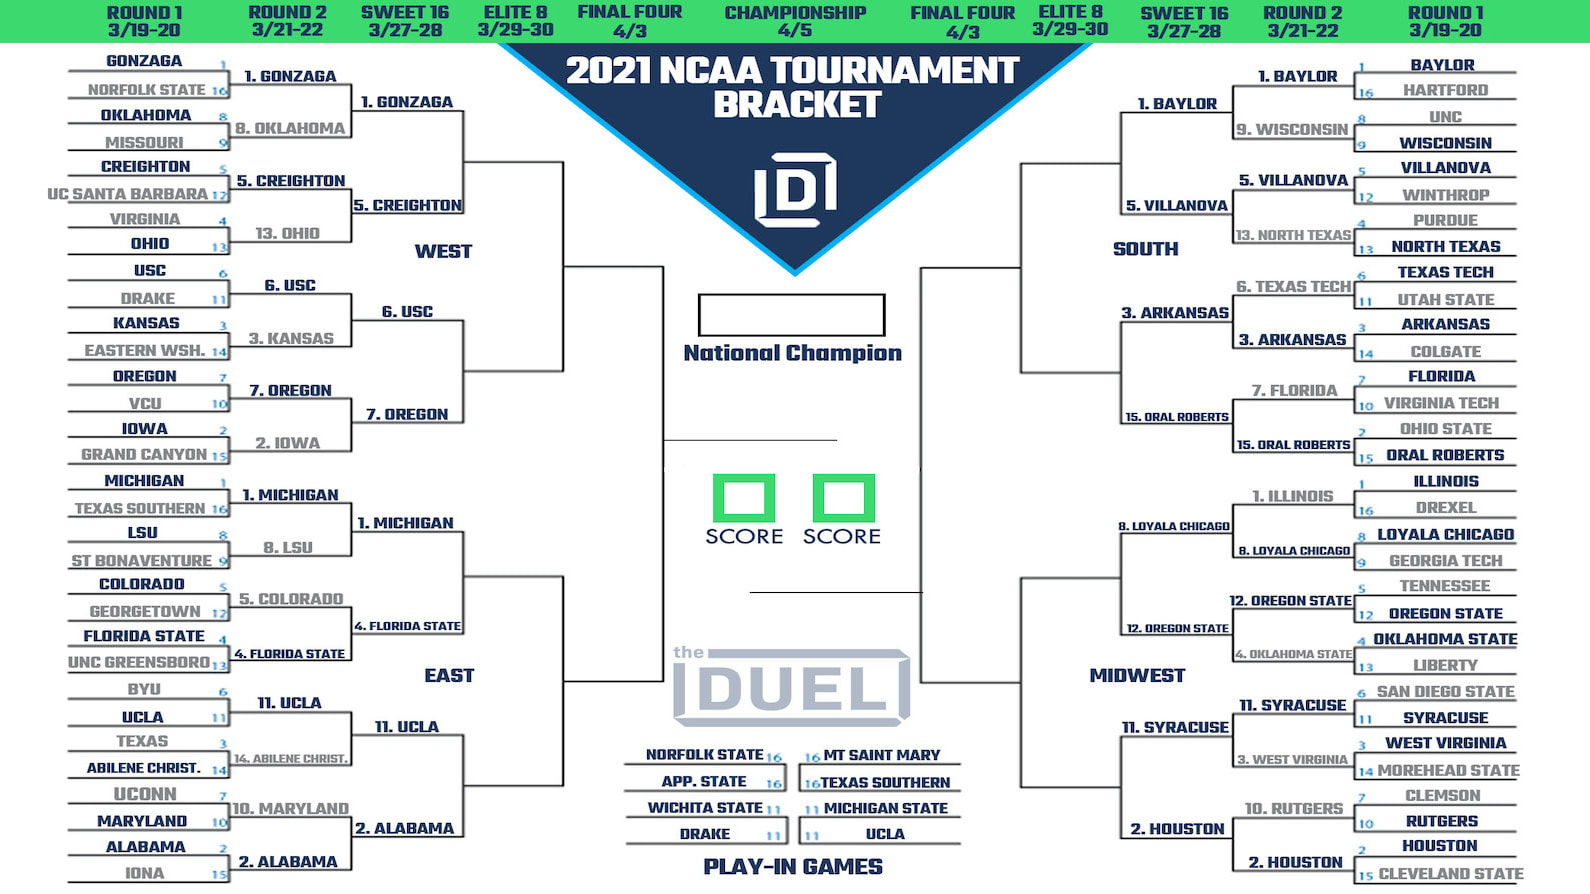 Updated March Madness Bracket for Sweet 16 Printable NCAA Tournament